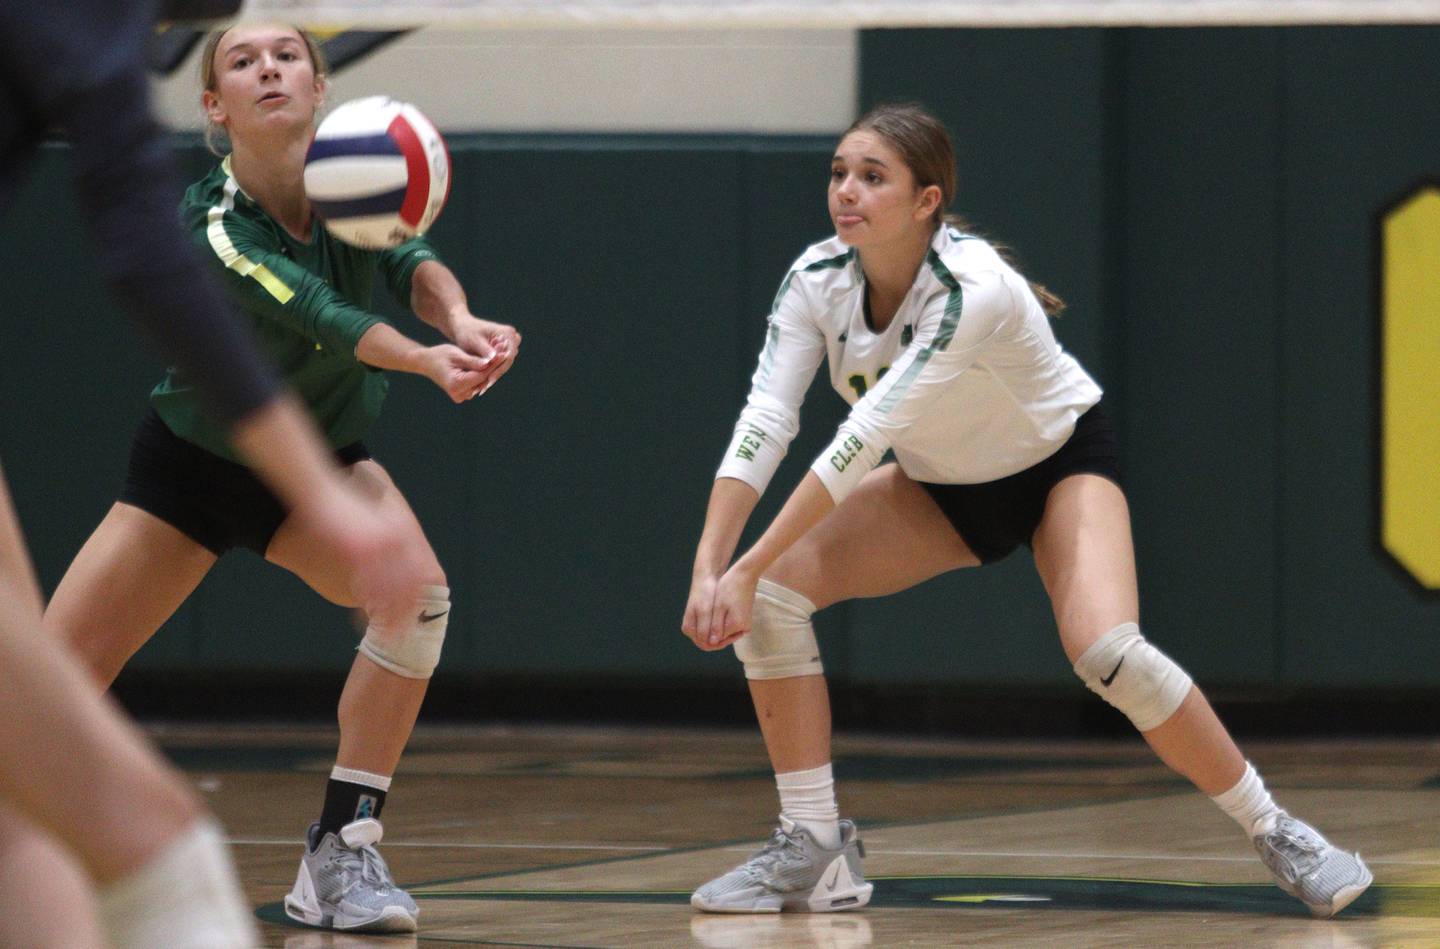 Crystal Lake South’s  Gabby Wire, left, and Bobbi Wire play the ball against Prairie Ridge in varsity volleyball at Crystal Lake South Tuesday night. The Gators won in three sets.